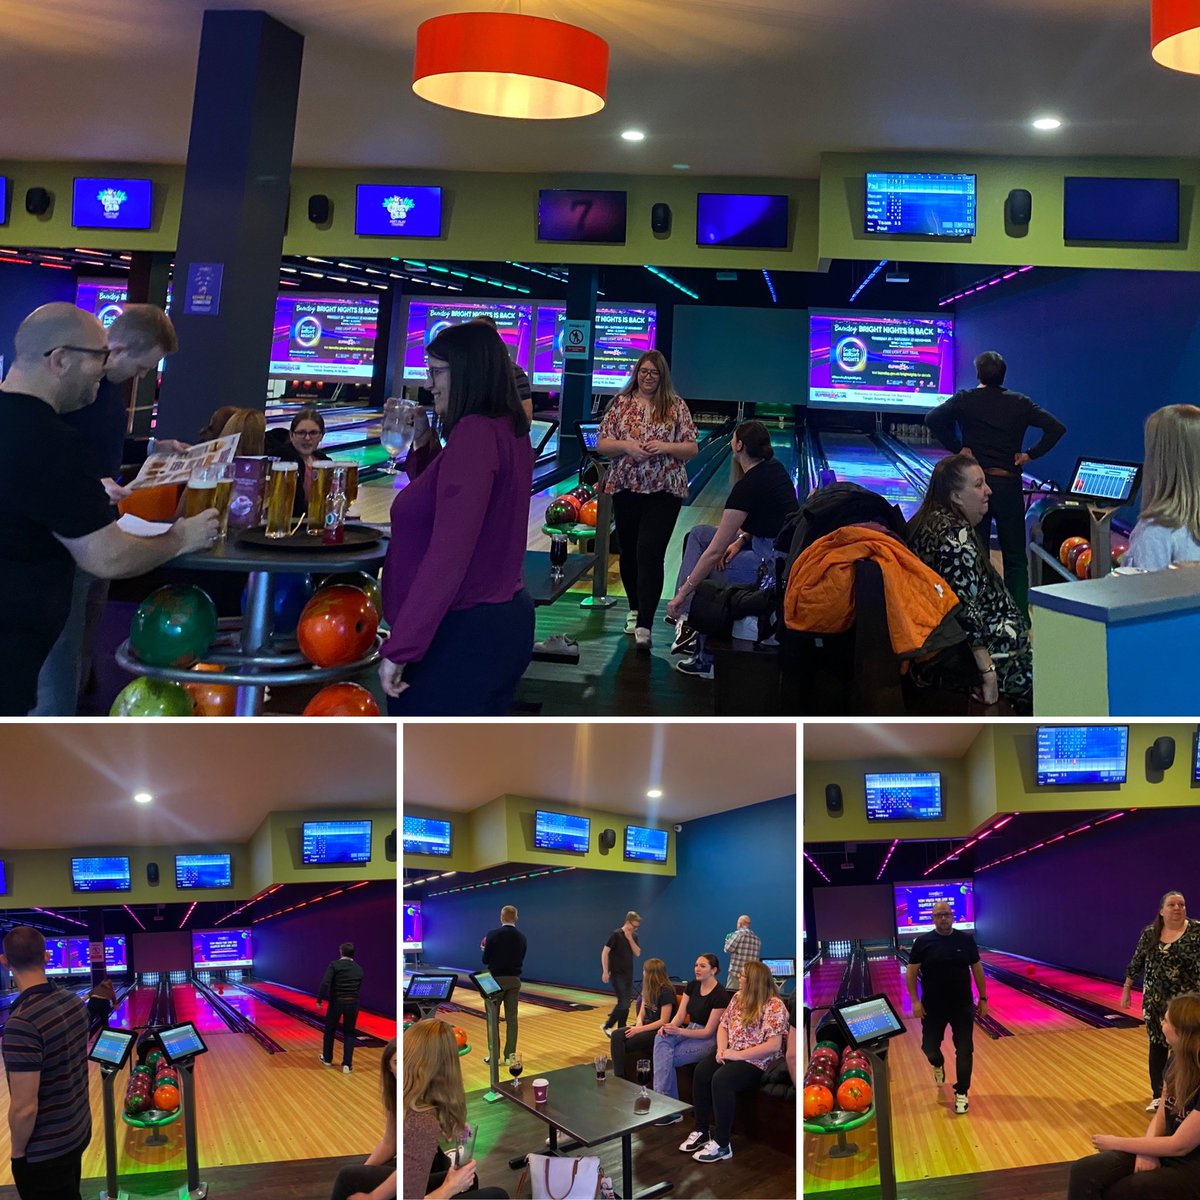 Our team enjoyed a brilliant night last night at the new SuperBowl @TGWBarnsley 🎳
 
Fantastic venue and offered us a great opportunity to relax and catch up with those who we haven’t seen in a while! 
 
#TeamHarrisAndCo #PeopleMatter #StaffSocial #BowlingNight